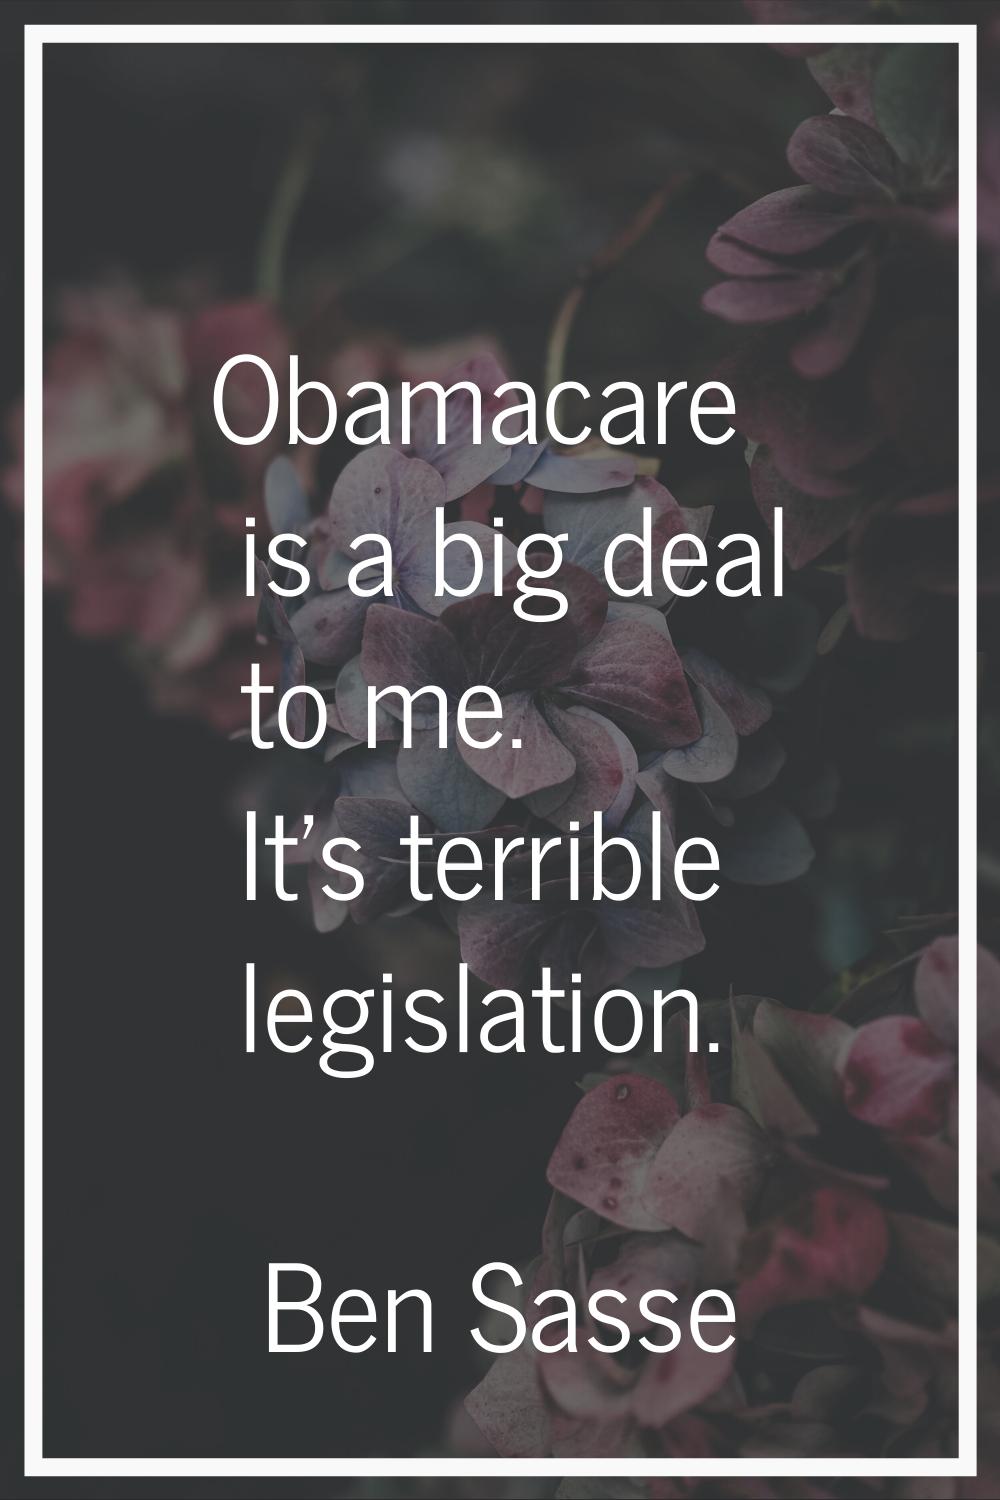 Obamacare is a big deal to me. It's terrible legislation.